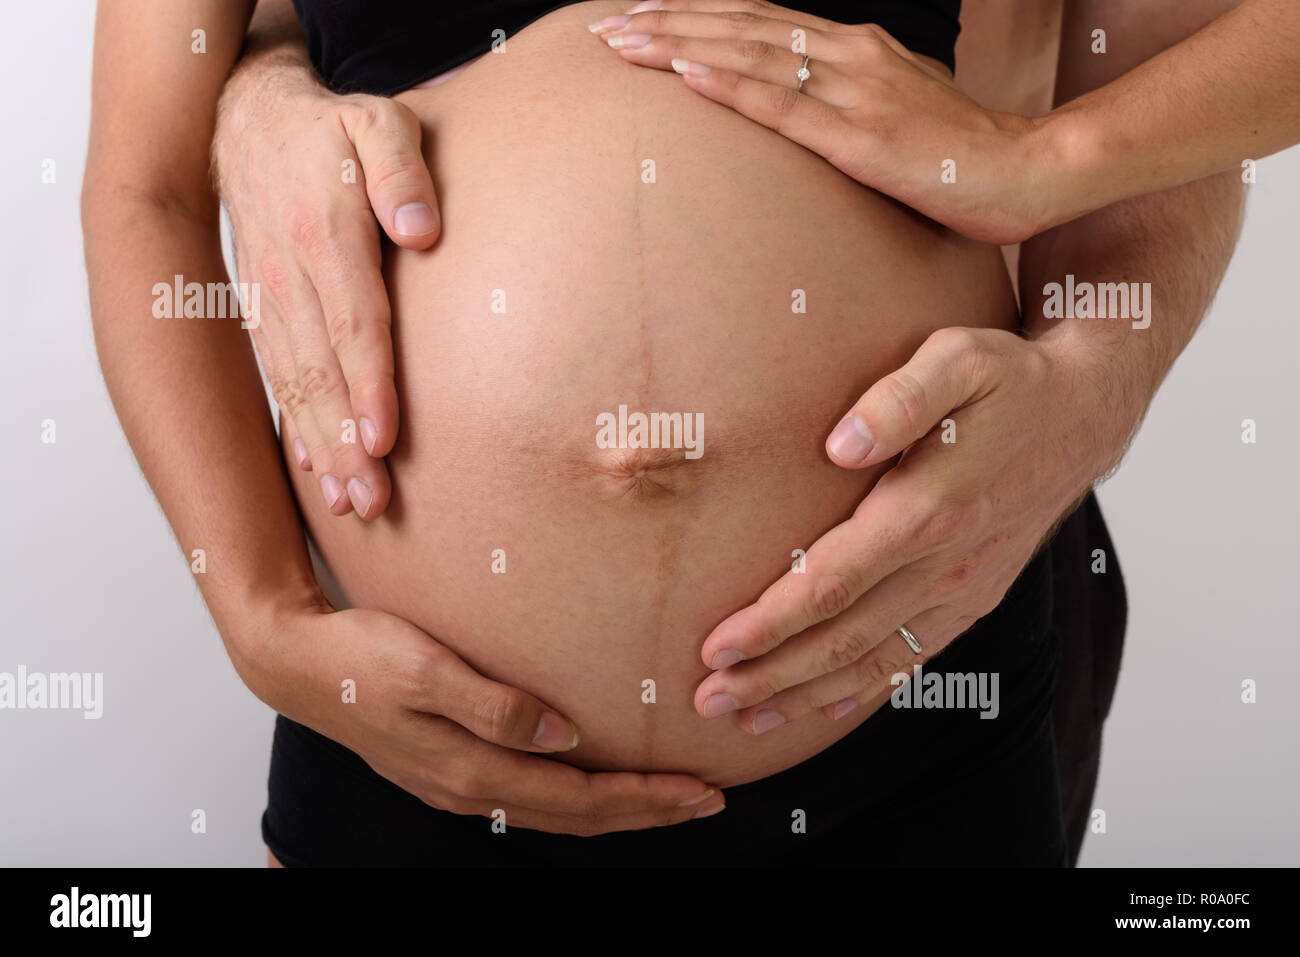 Asian pregnant woman with man holding her stomach Stock Photo